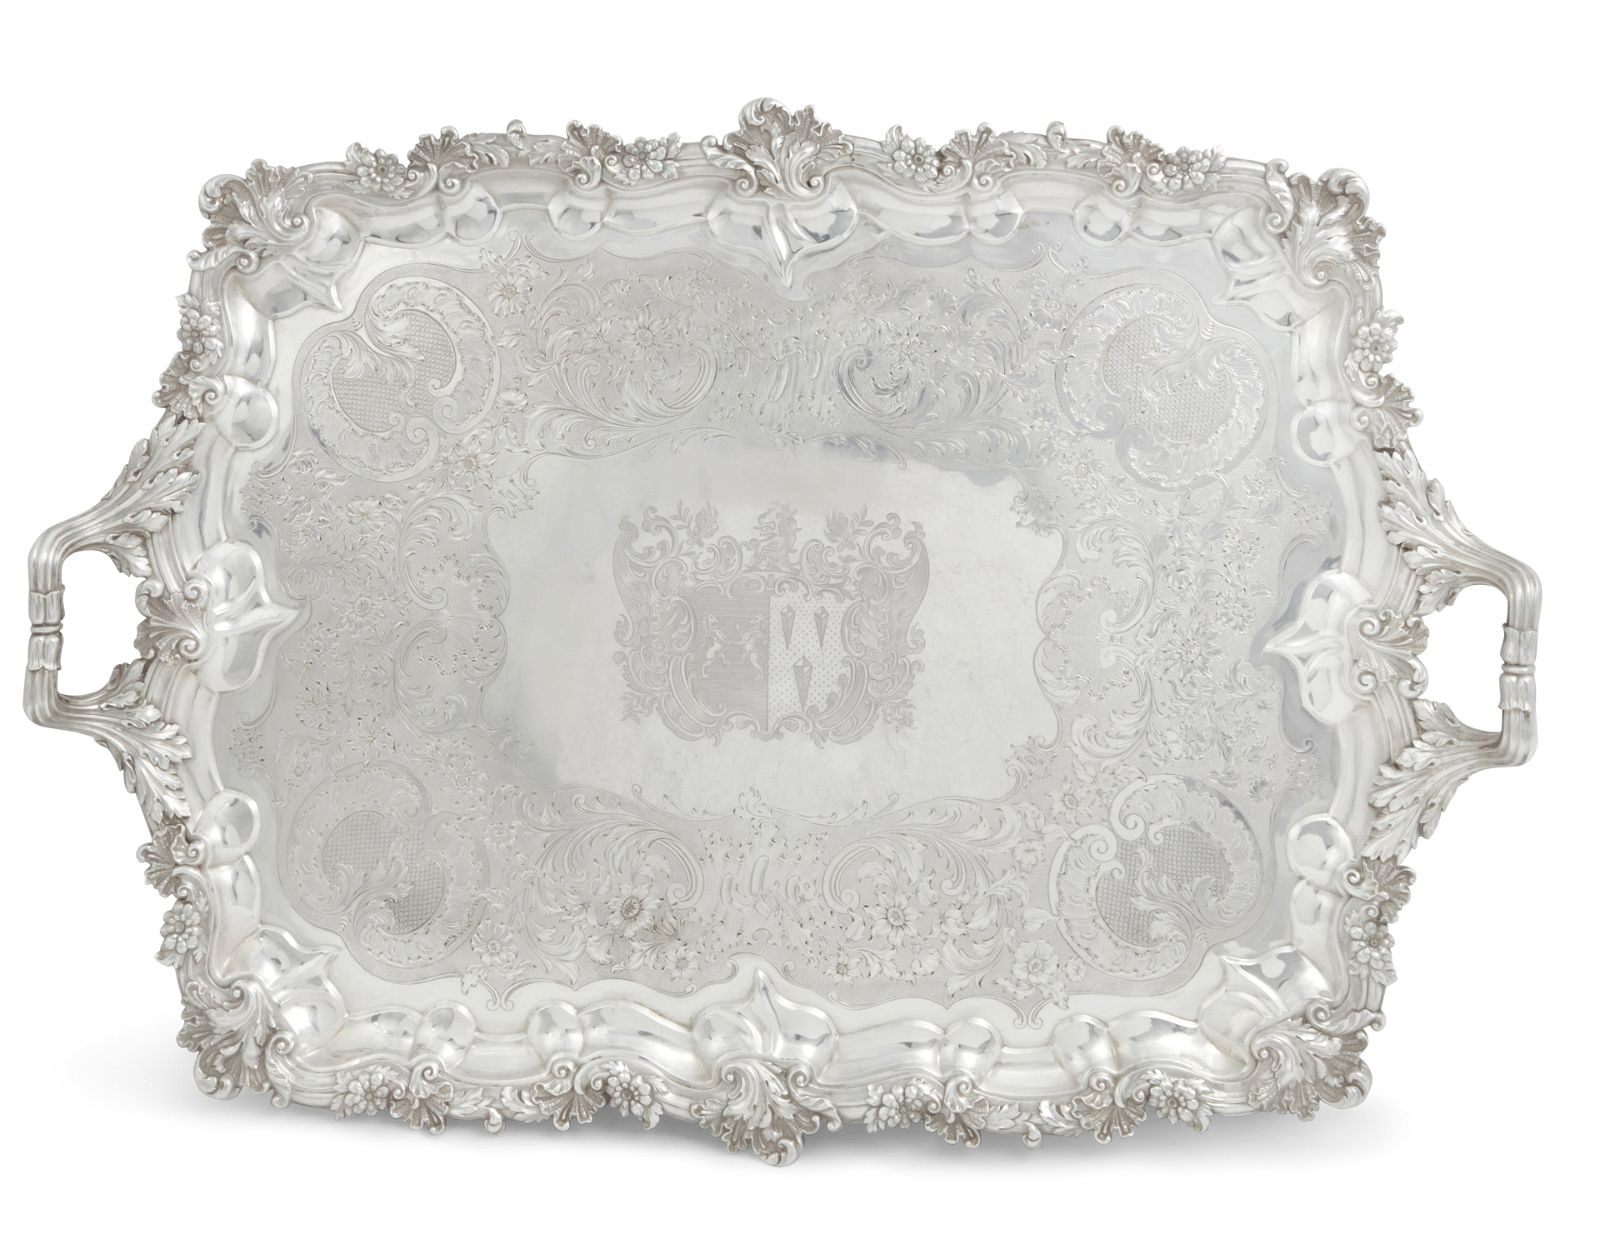 A WILLIAM IV STERLING SILVER TWO 2fb375f